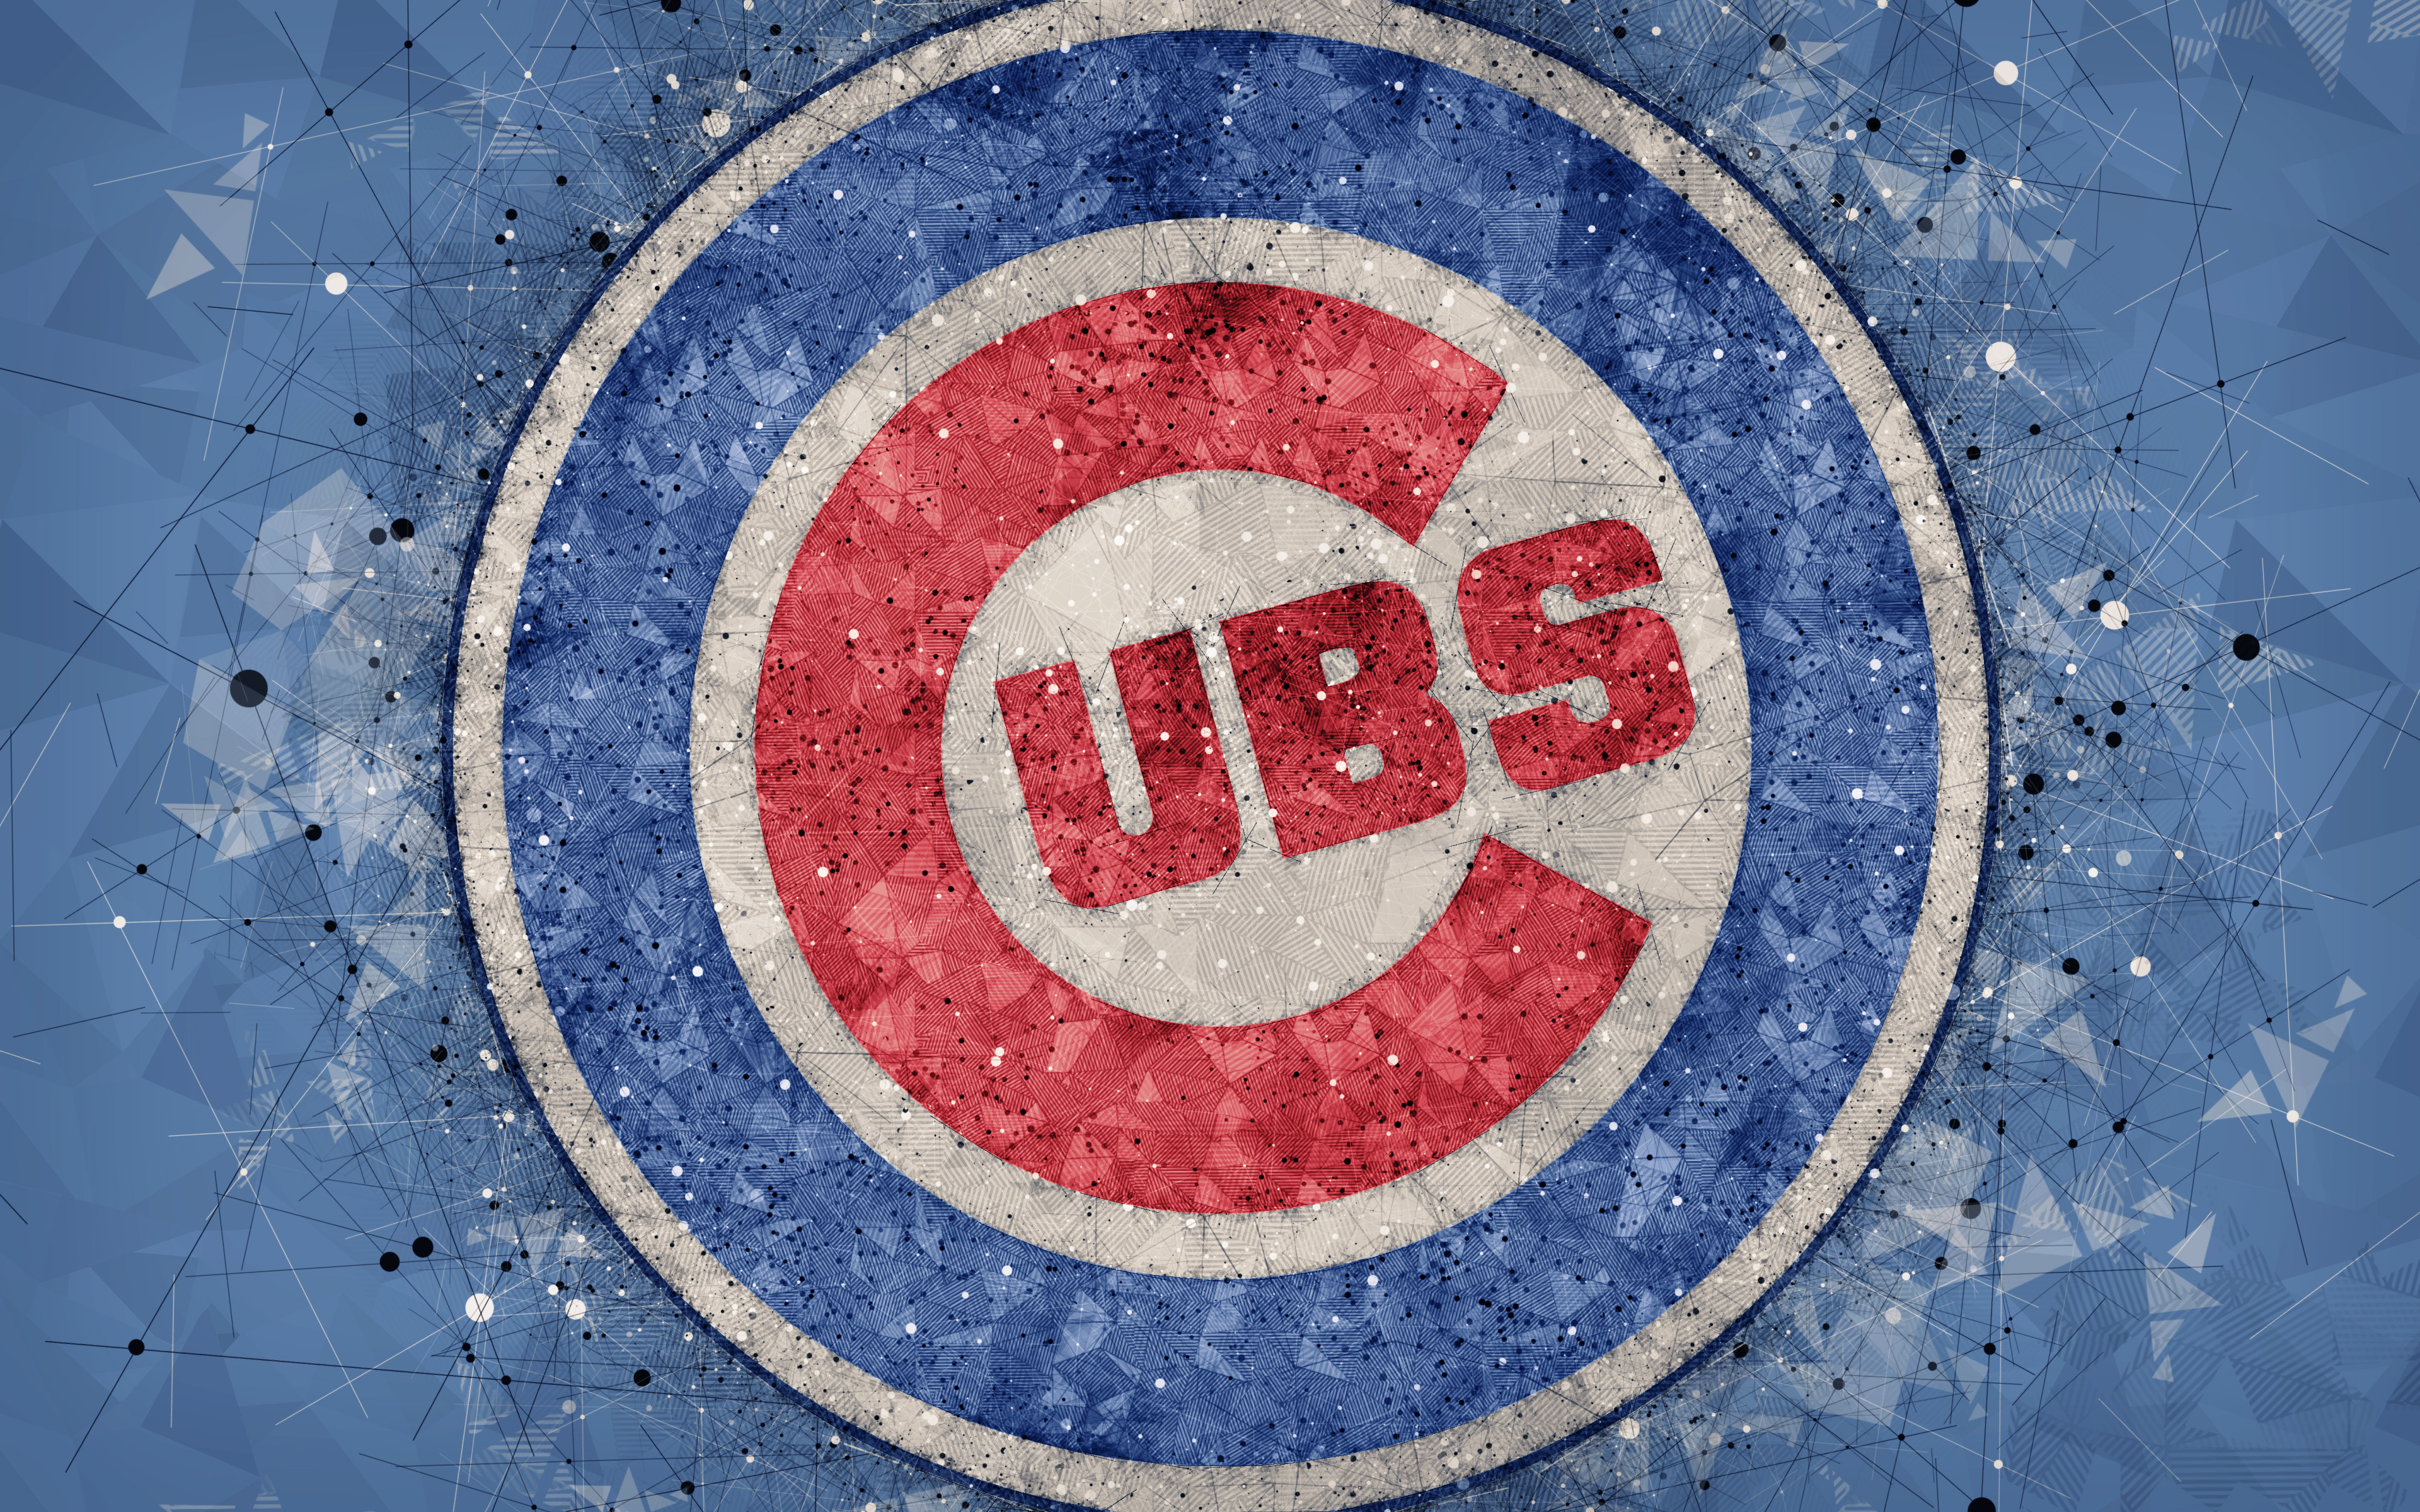 Download wallpapers Chicago Cubs flag MLB blue red metal background  american baseball team Chicago Cubs logo USA baseball Chicago Cubs  golden logo for desktop with resolution 2880x1800 High Quality HD pictures  wallpapers